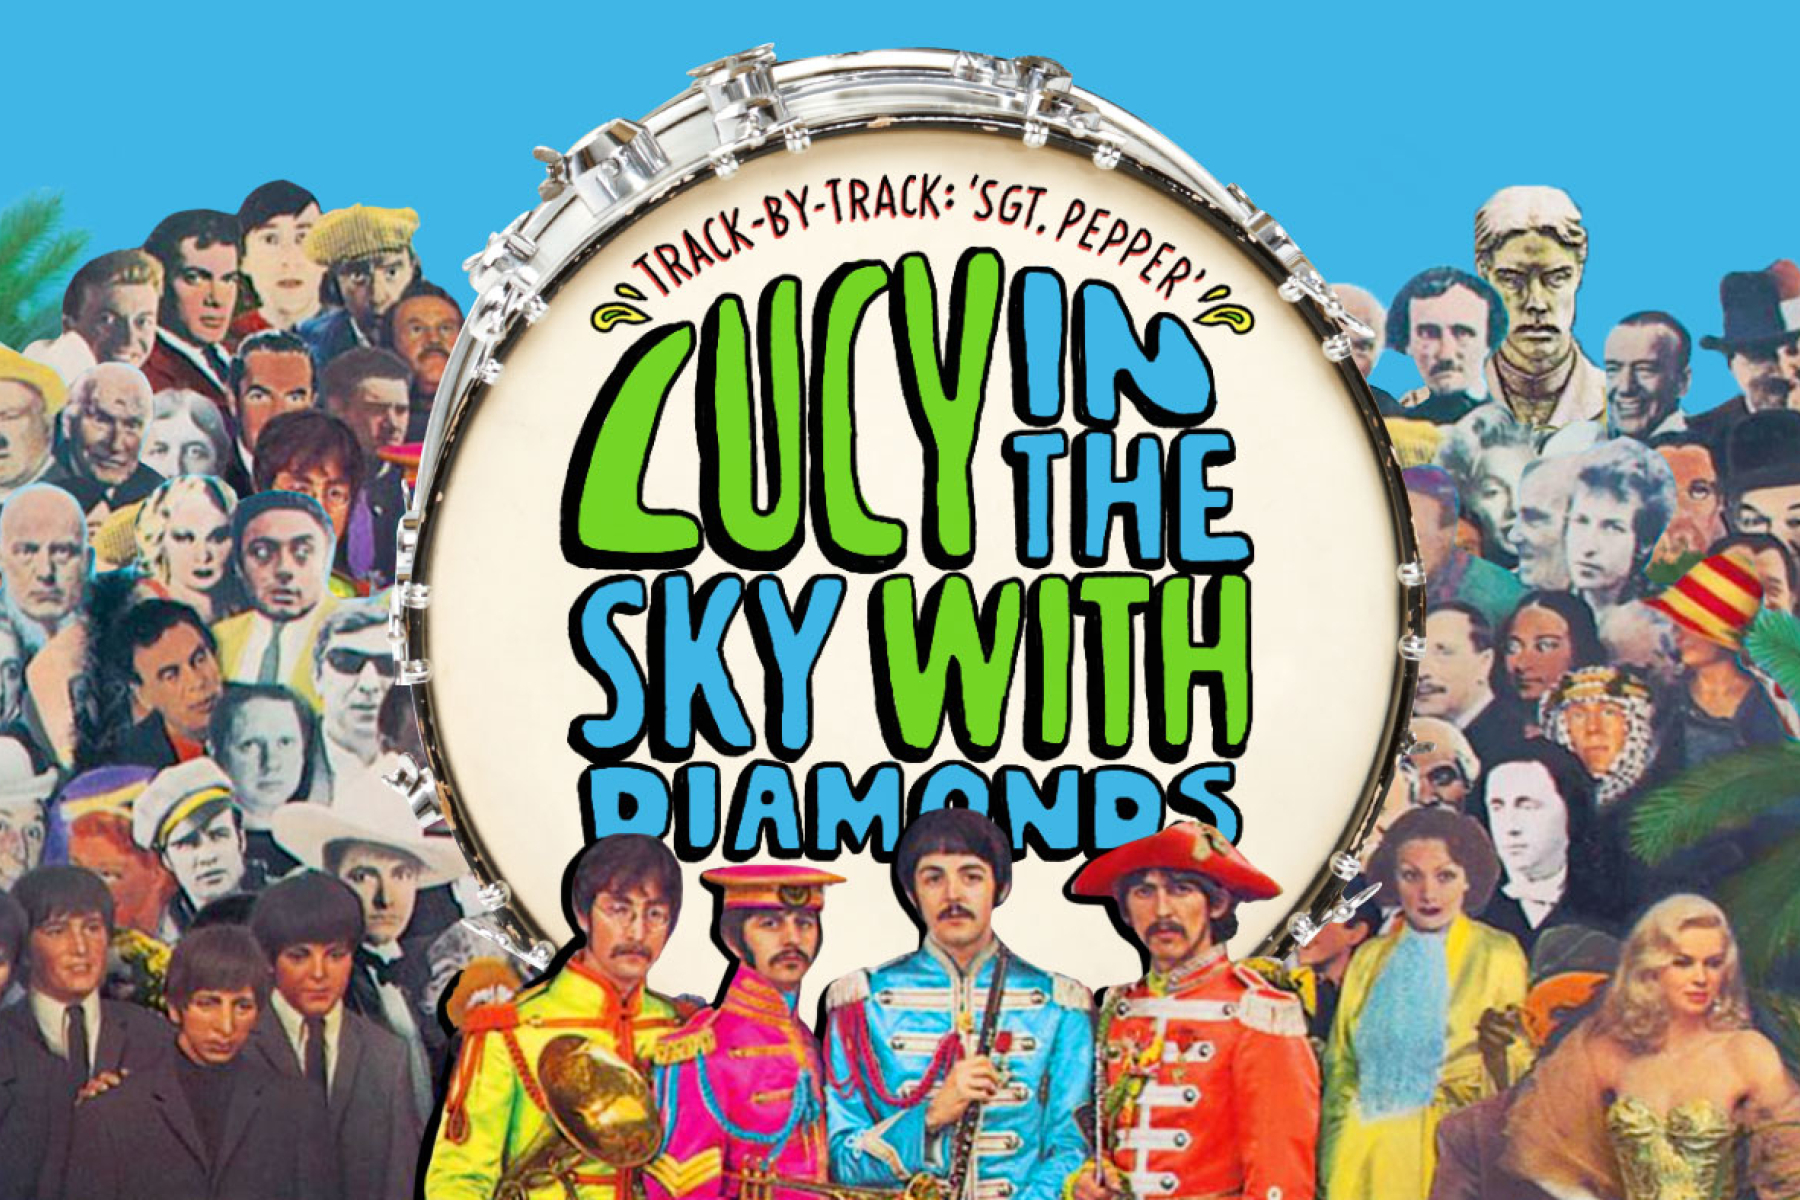 Lucy in The Sky With Diamonds</a><br> by <a href='/profile/Bling-King/'>Bling King</a>